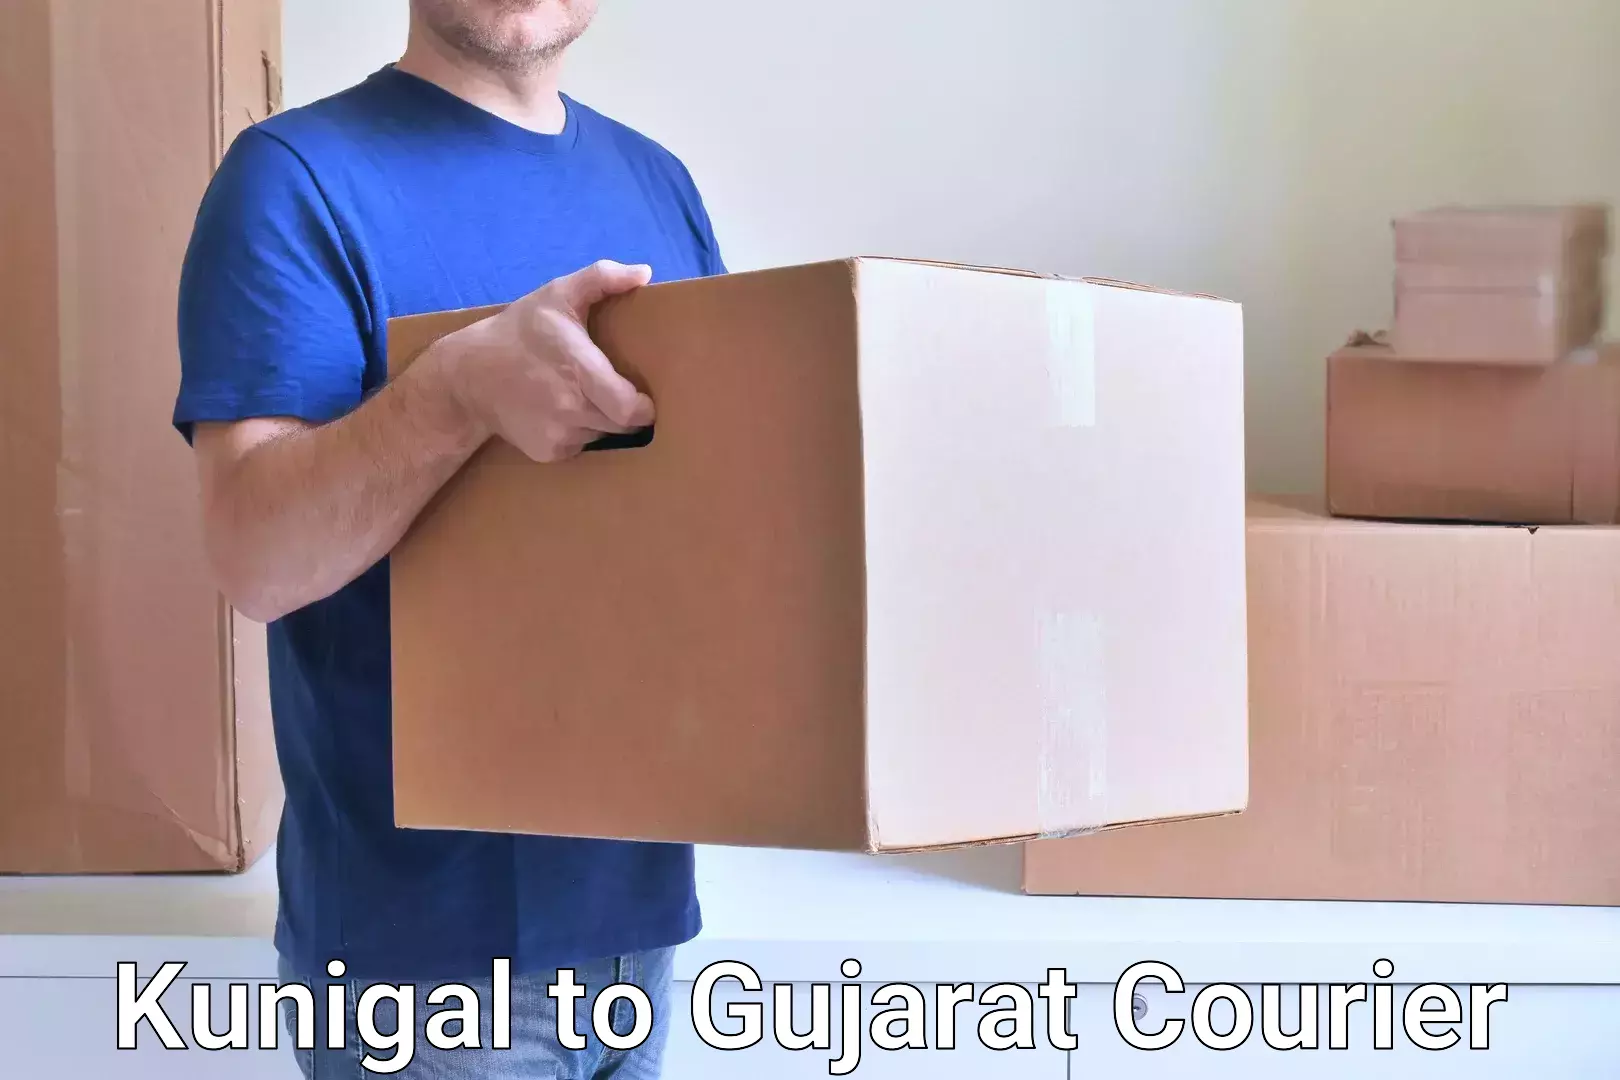 State-of-the-art courier technology Kunigal to IIIT Vadodara